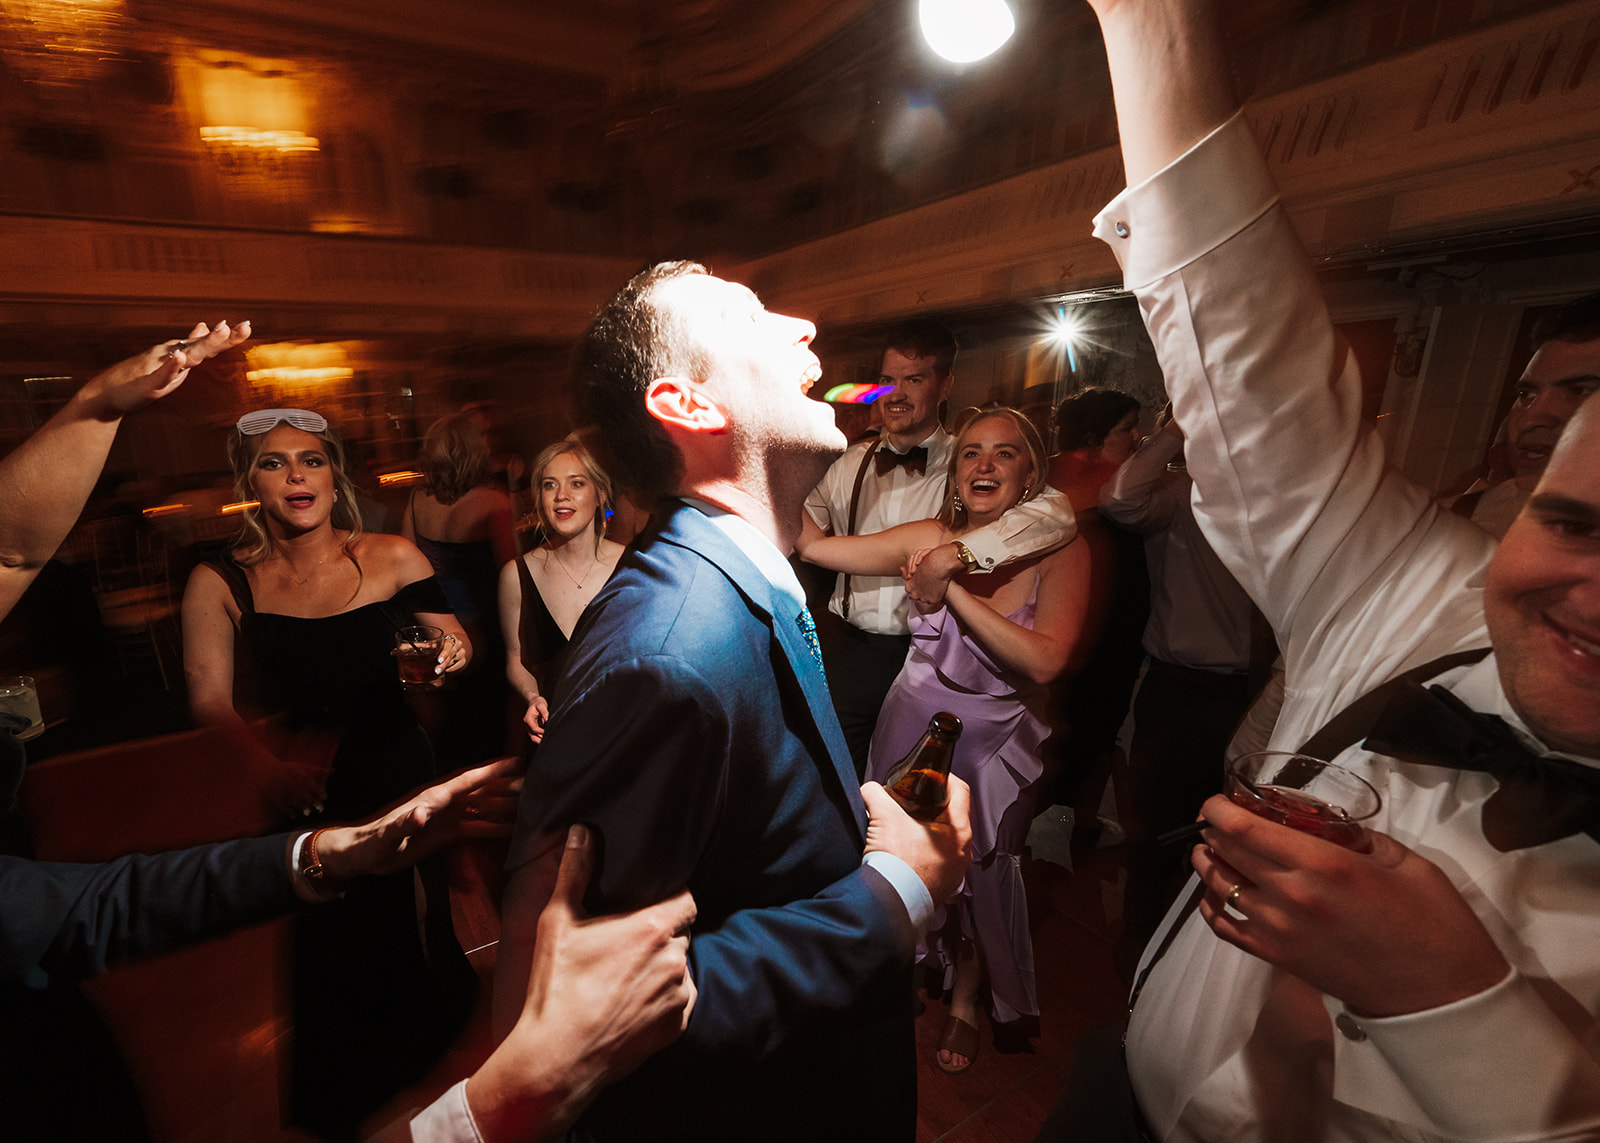 The Blackstone hotel in chicago wedding photos - reception  epic dance party